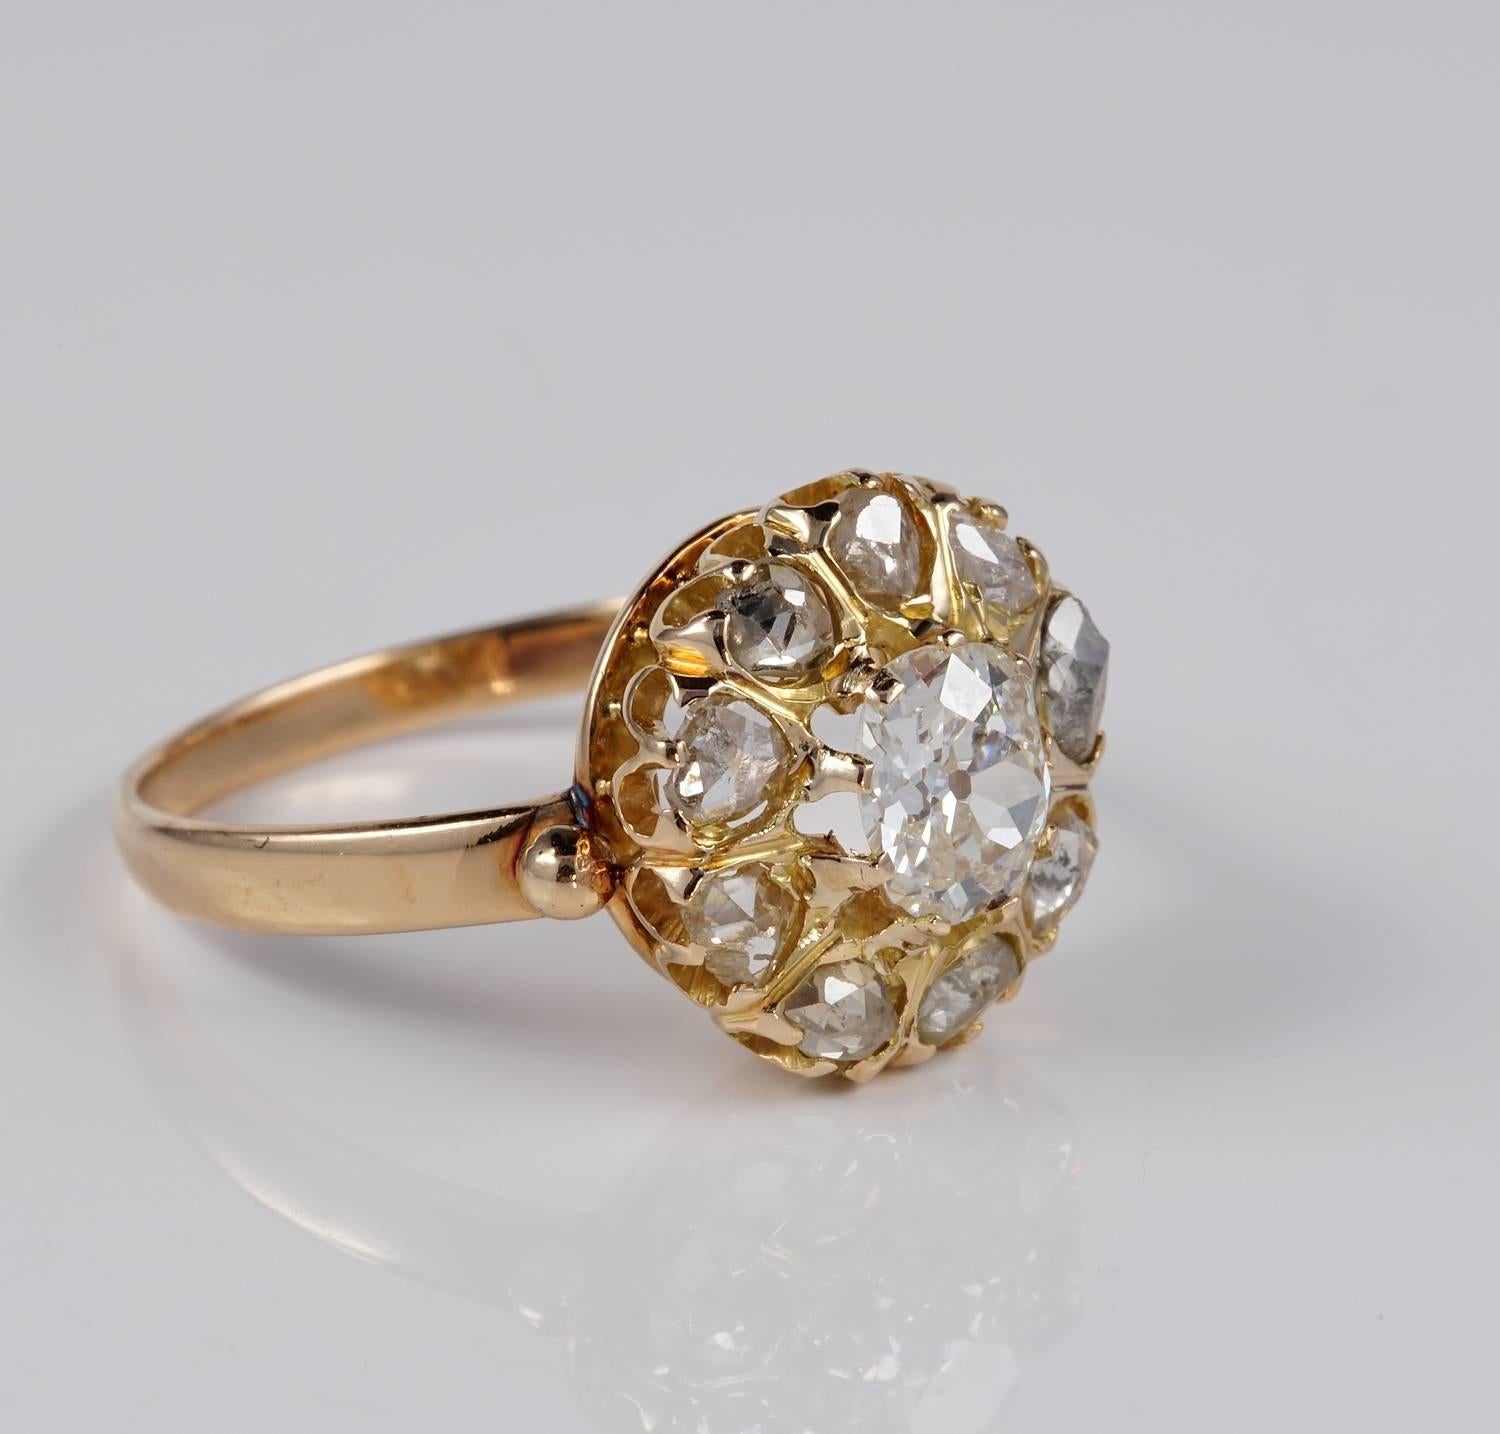 A traditional Victorian period Diamond cluster ring
Exquisitely set with a centre old mine cushion cut of .65 Ct rated as G/VS
with a surrounding circle of rose cut Diamonds complementing the beautiful daisy cluster design
adding .90 Ct of more